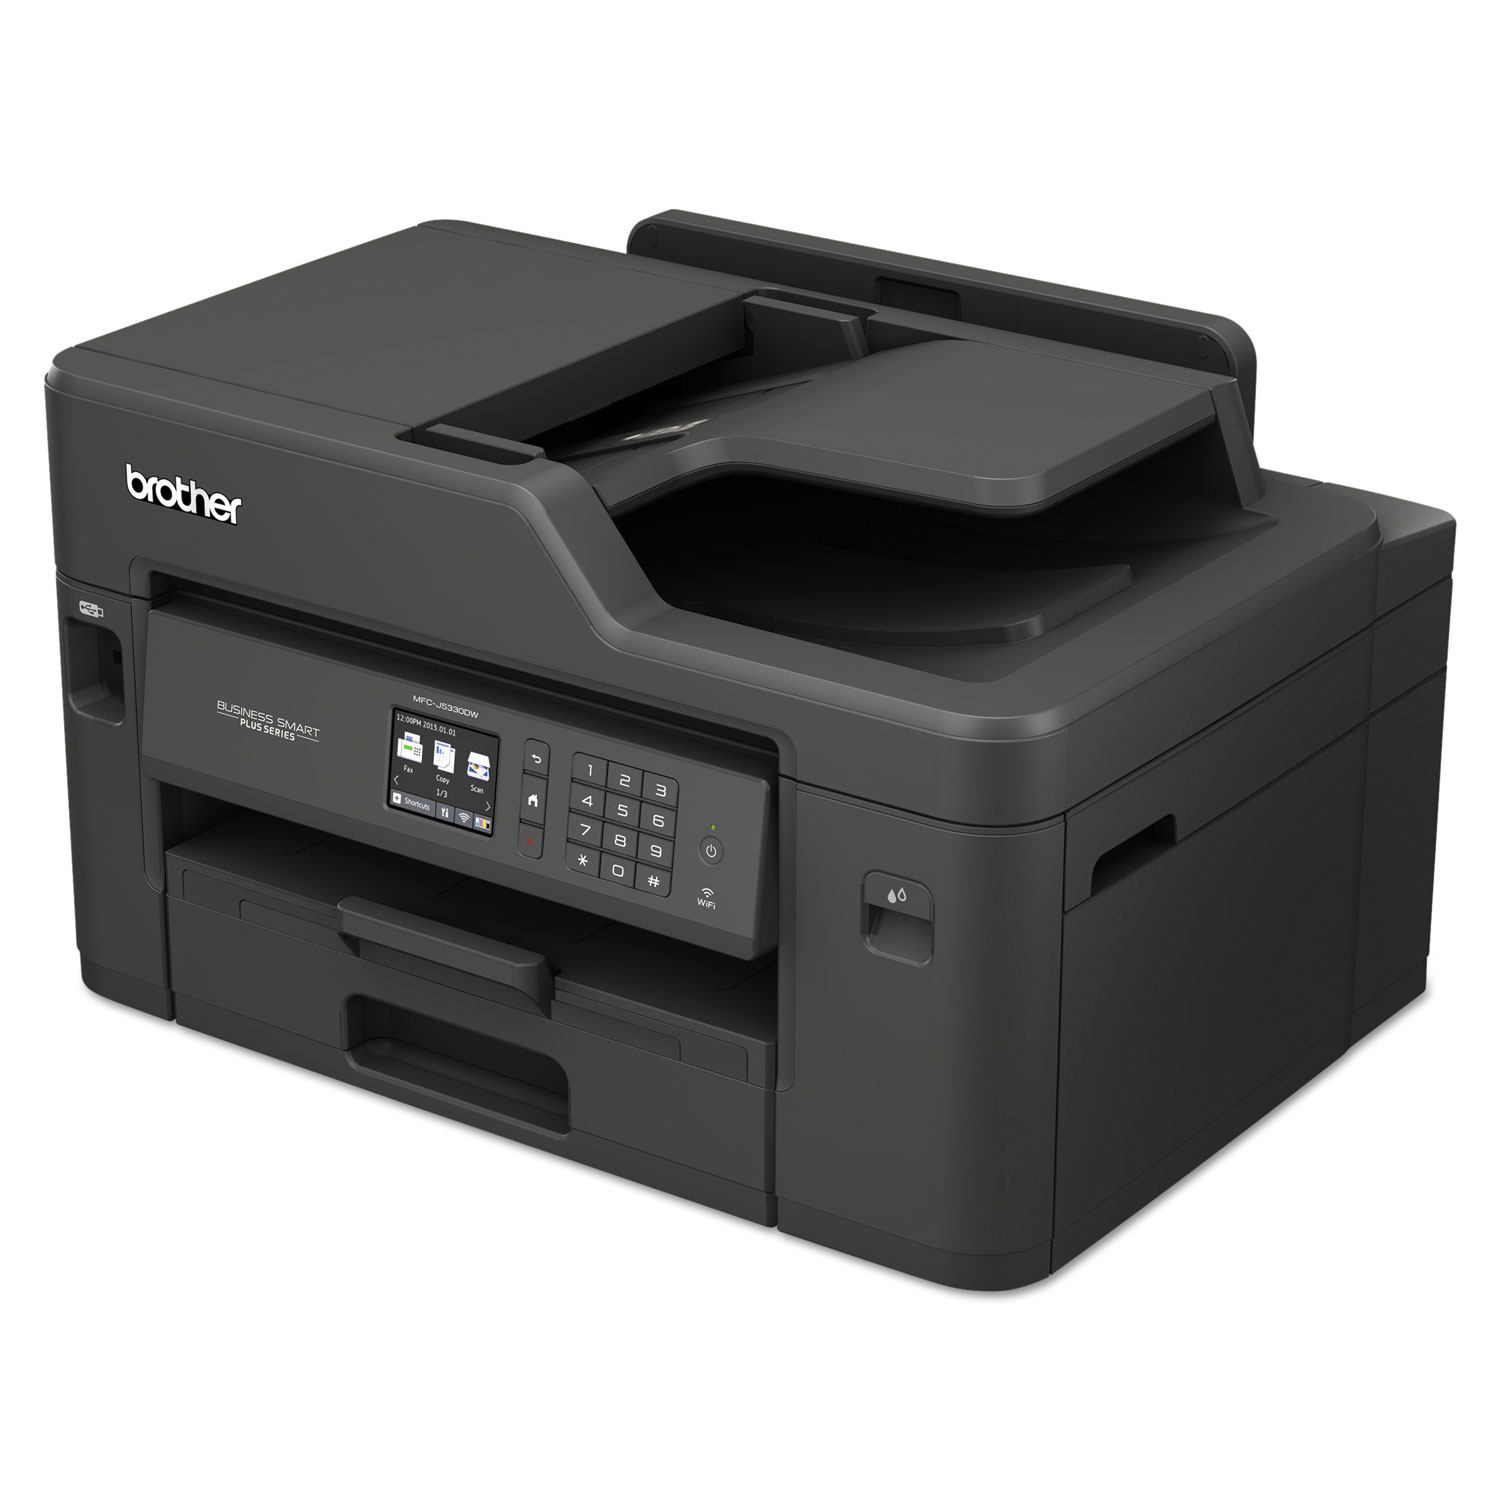 Business Smart Plus MFC-J5330DW Color Inkjet All-in-One, Copy/Fax/Print/Scan